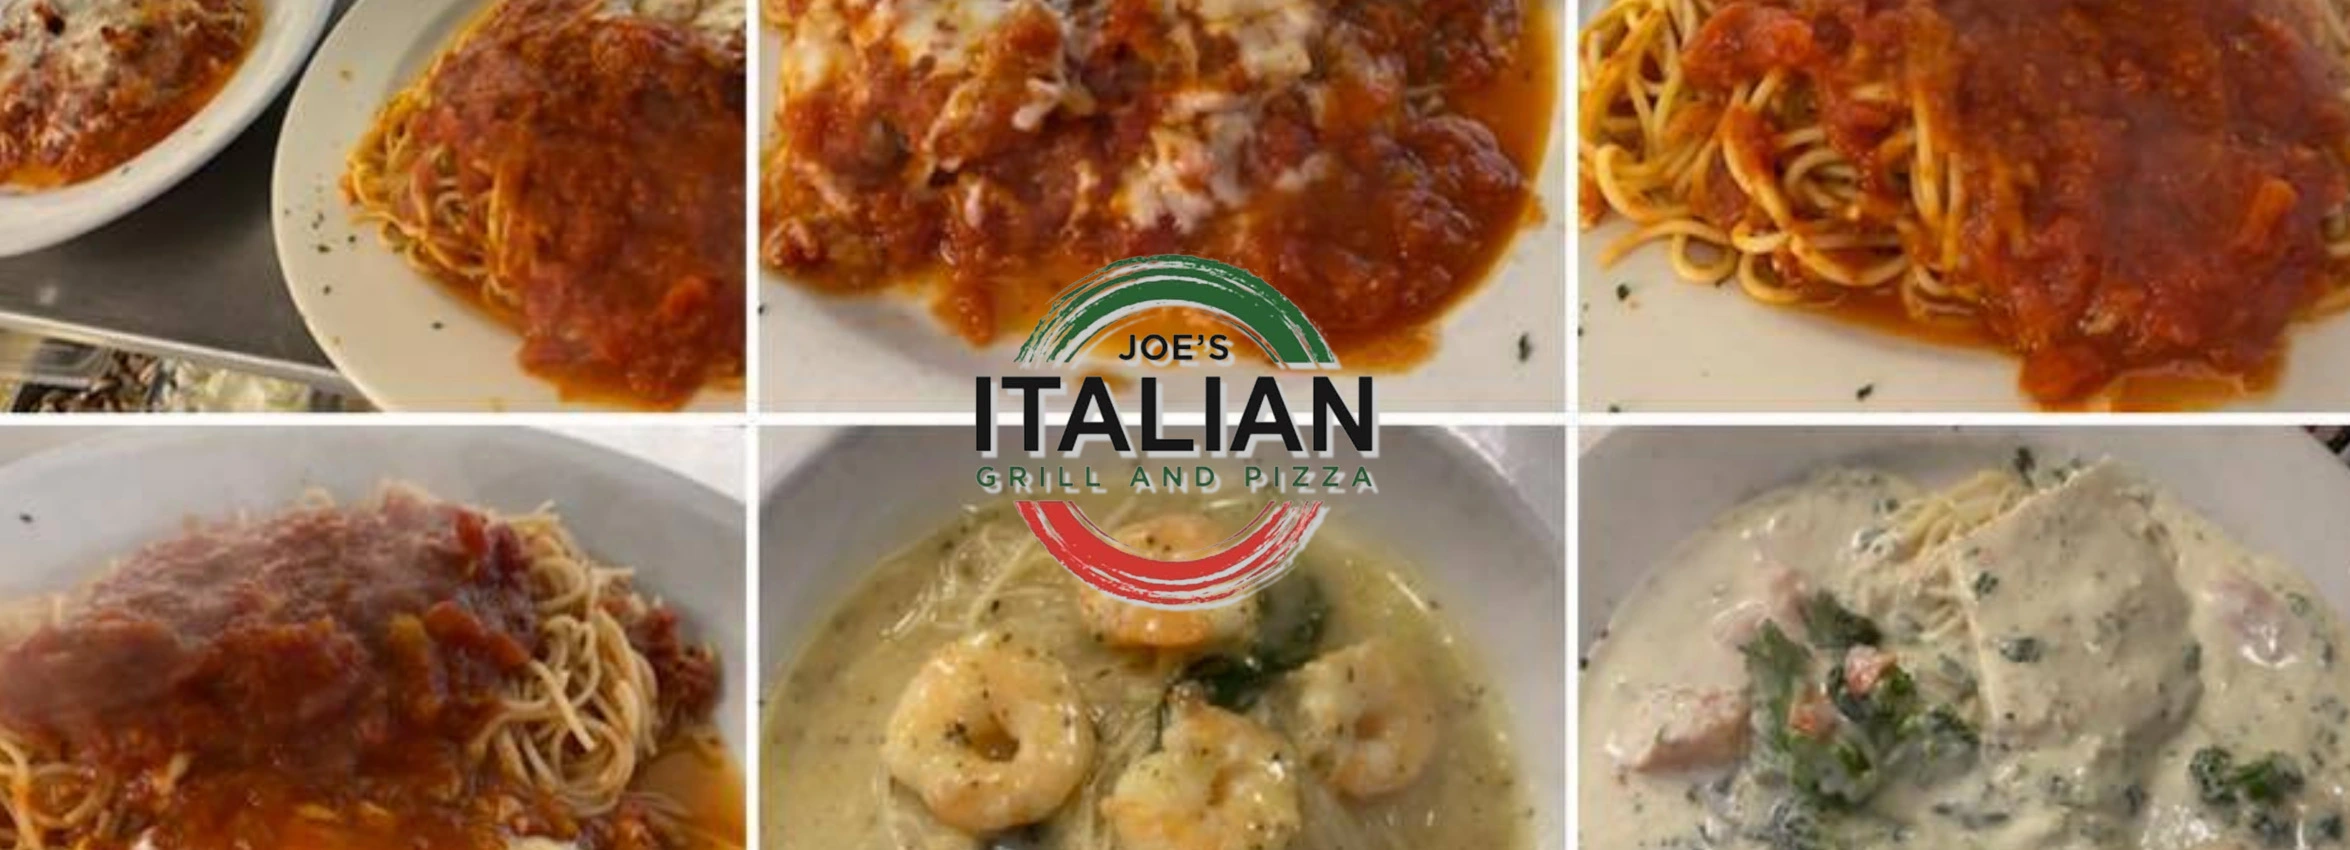 Joes-Italian-Grill-and-Pizza